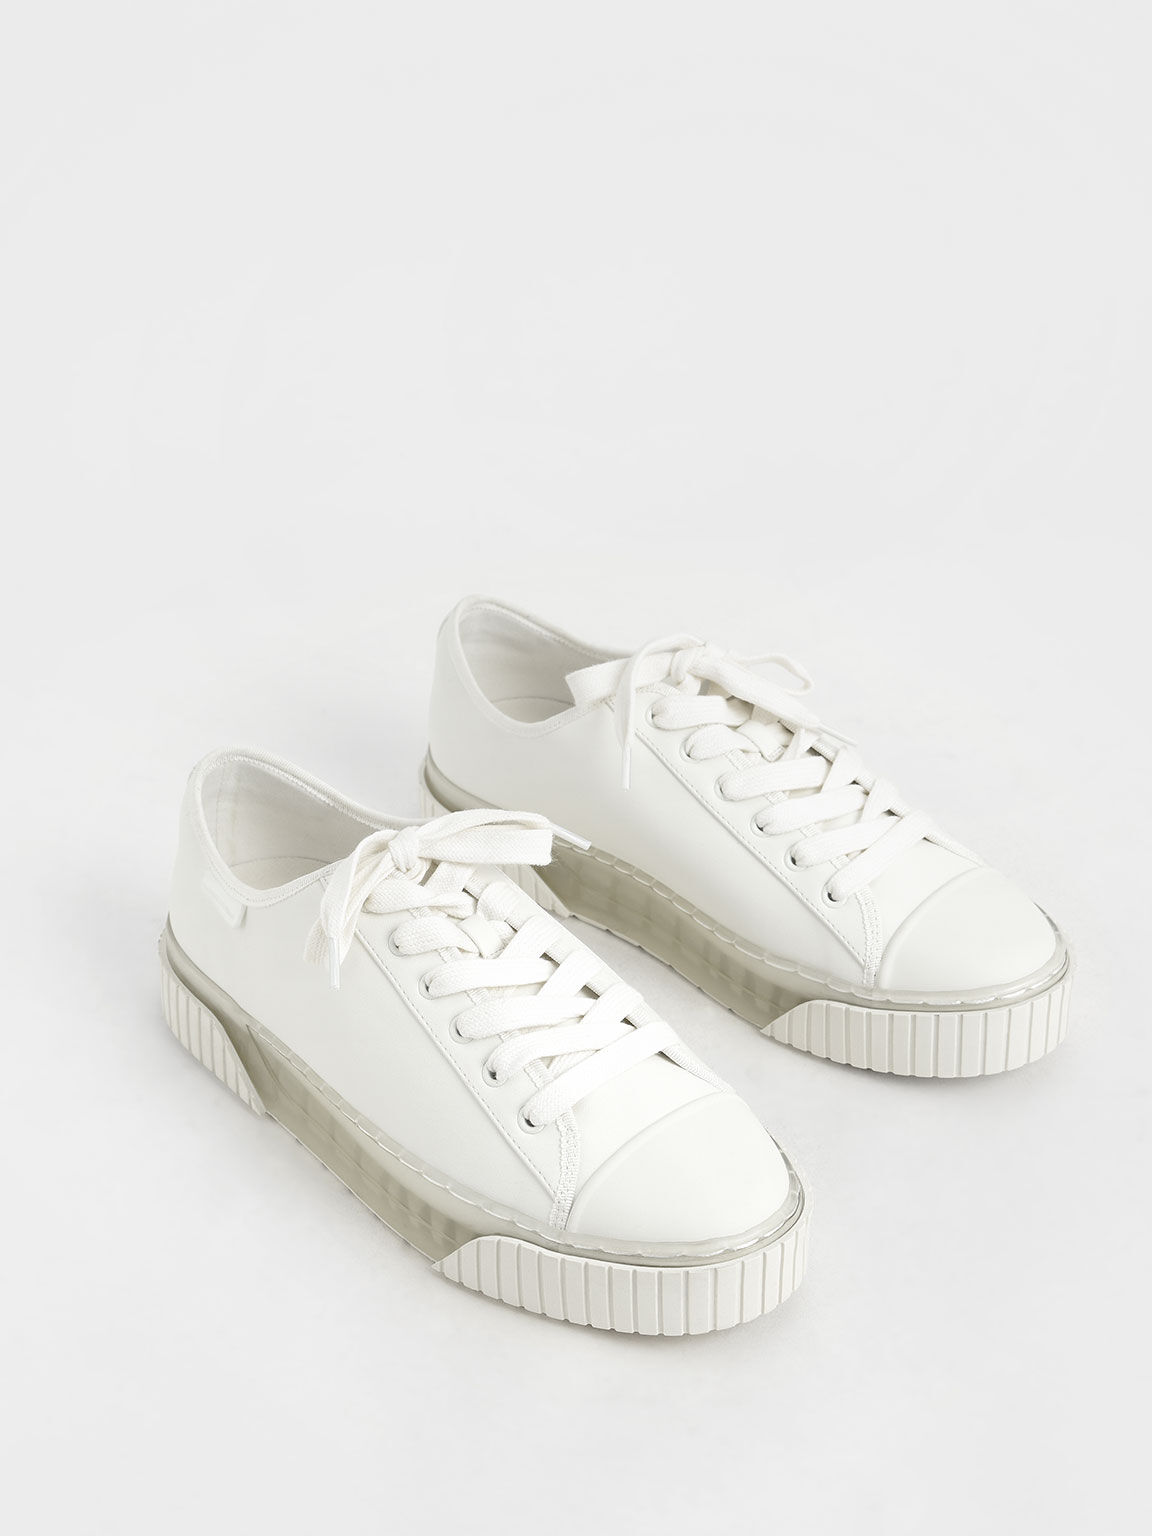 Purpose Collection 2021: Platform Sneakers, White, hi-res